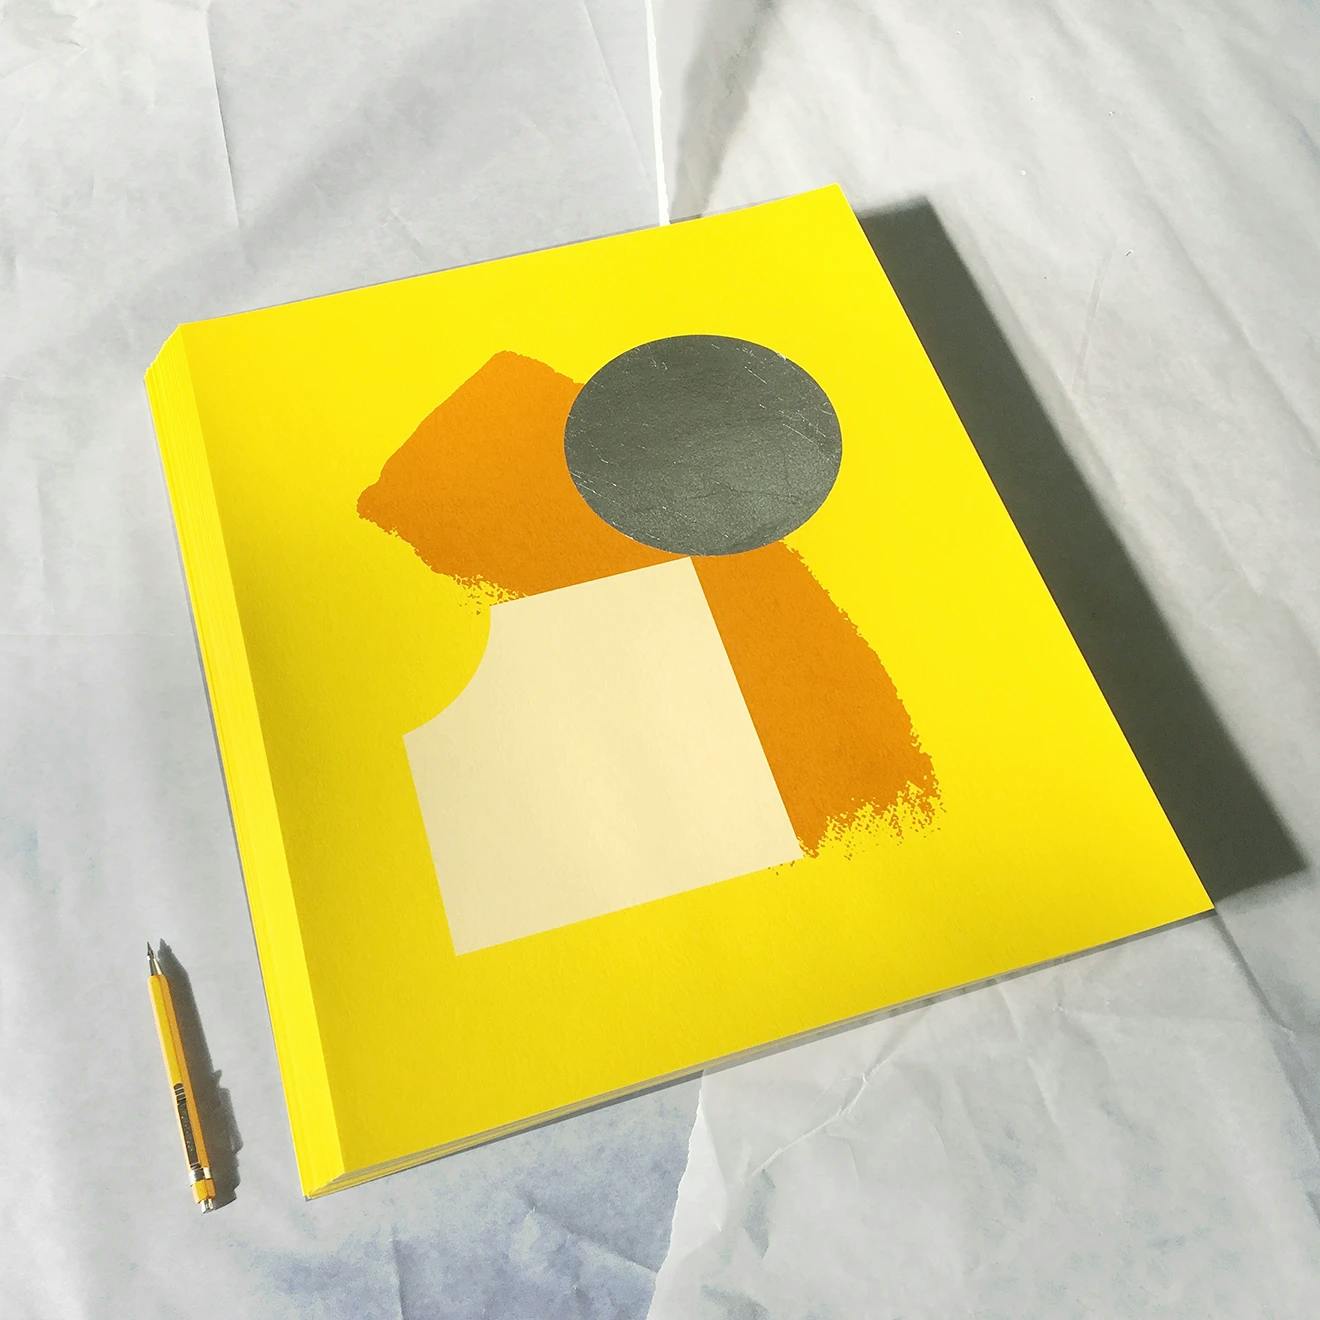 A stack of Chad Kouri's print Opportunity for Reflection (Yellow).